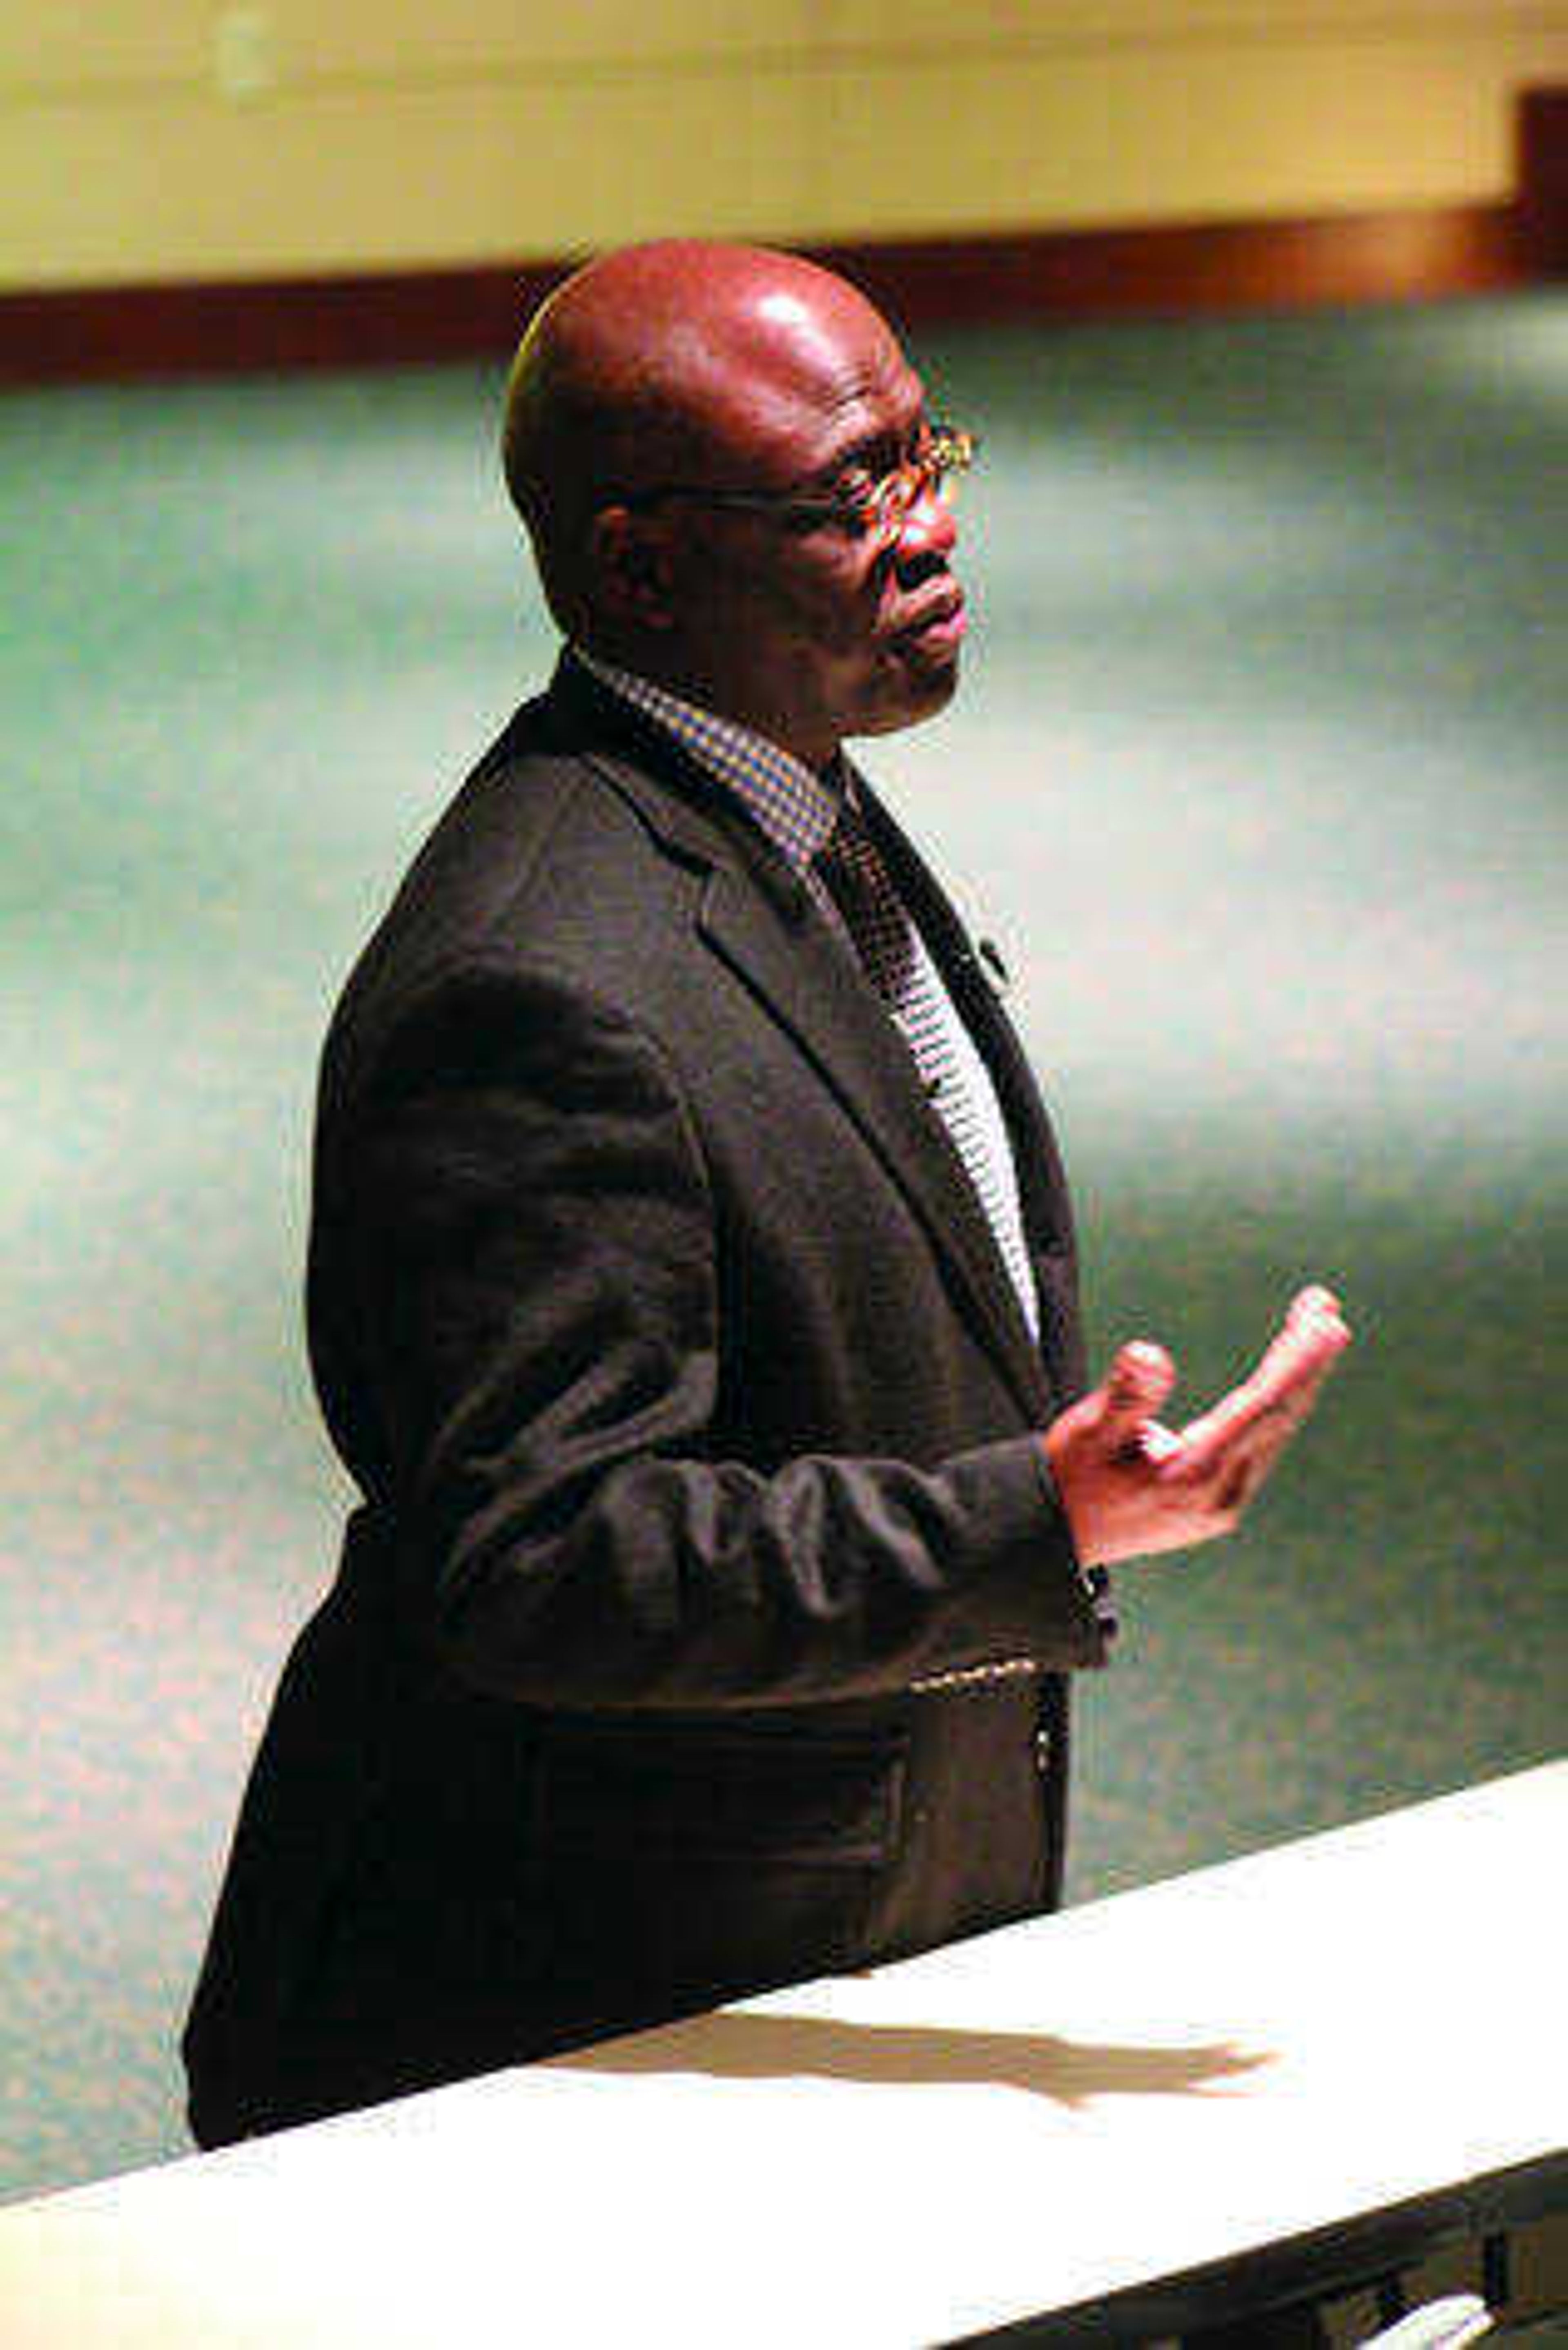 Dr. Benjamin Ola. Akande is one of four presidential candidates that visited Southeast in February. Photo by Logan Young